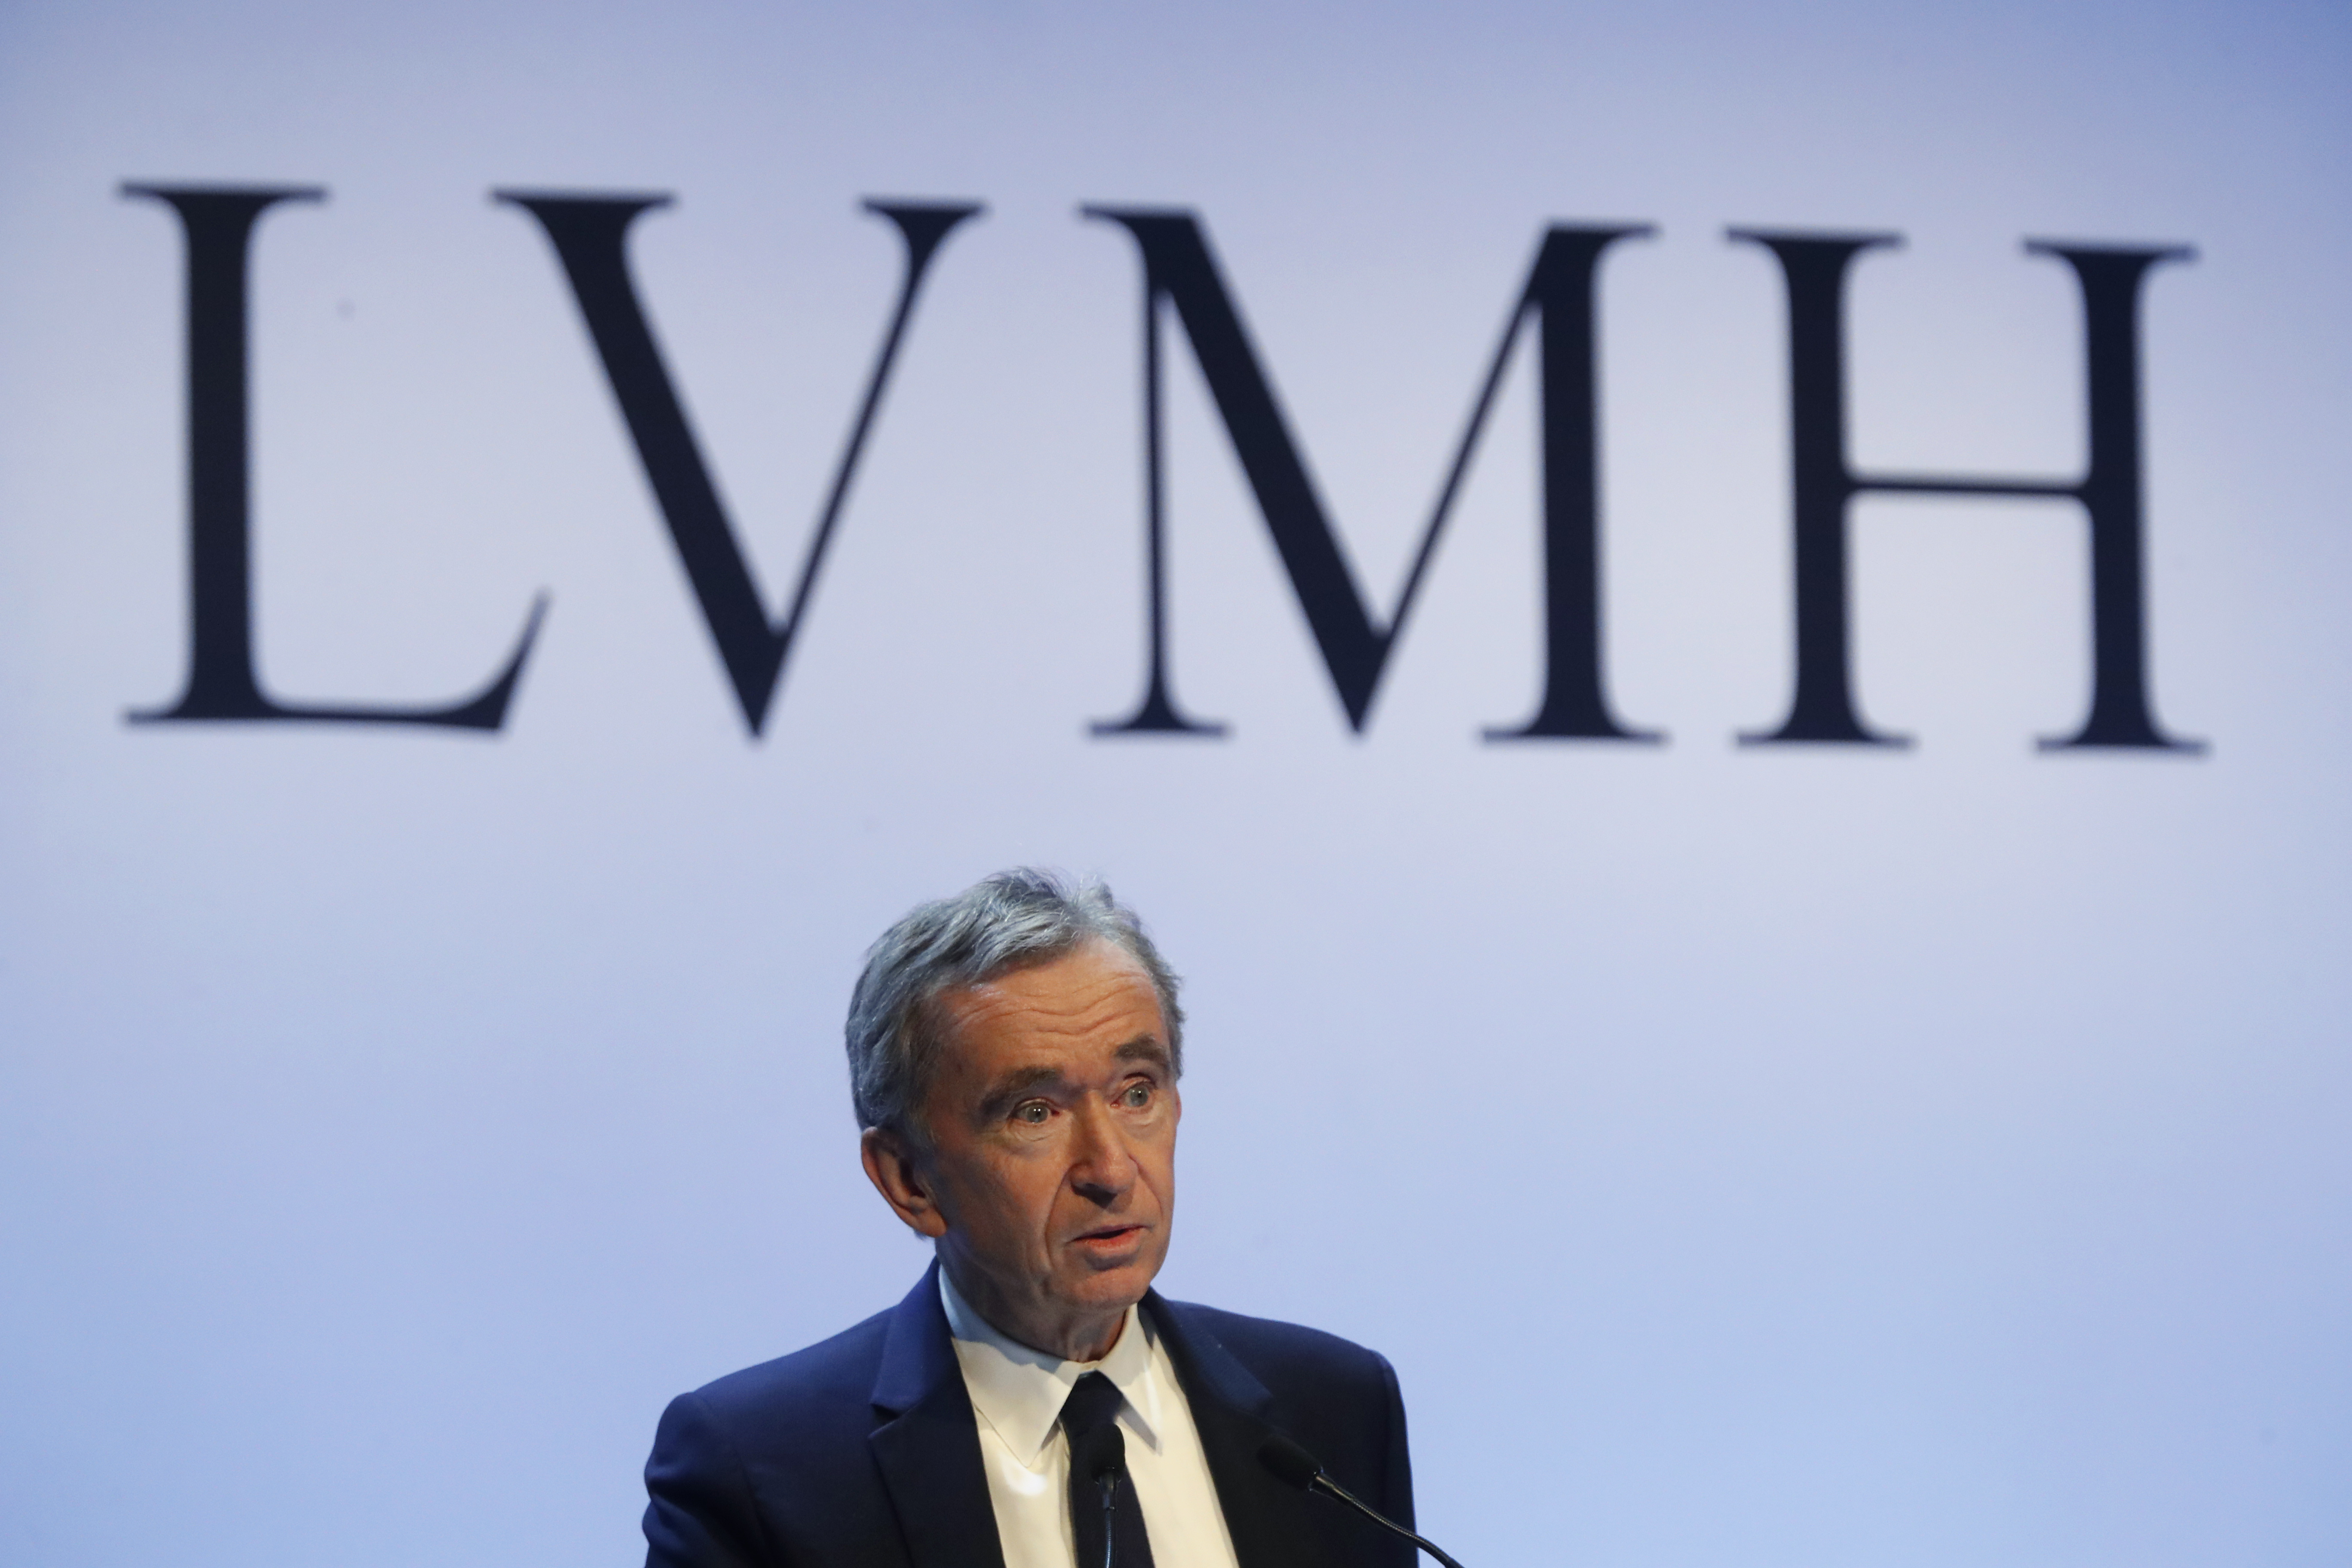 Bernard Arnault: This is the French businessman who just beat out